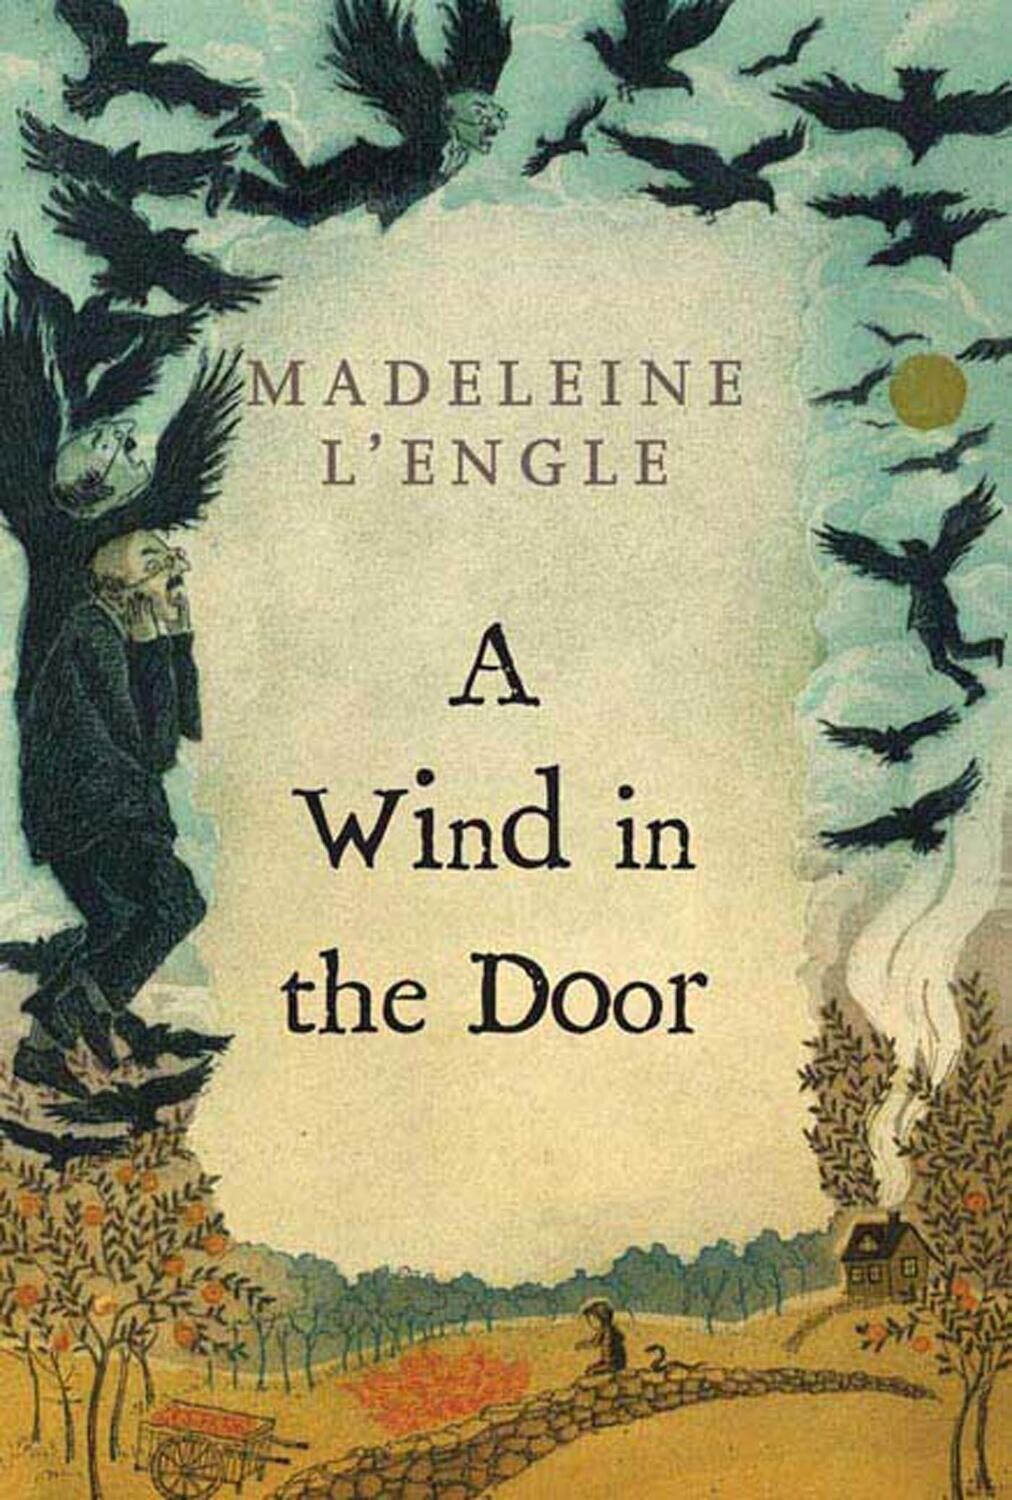 A Wind in the Door- L'engle - Young Adult